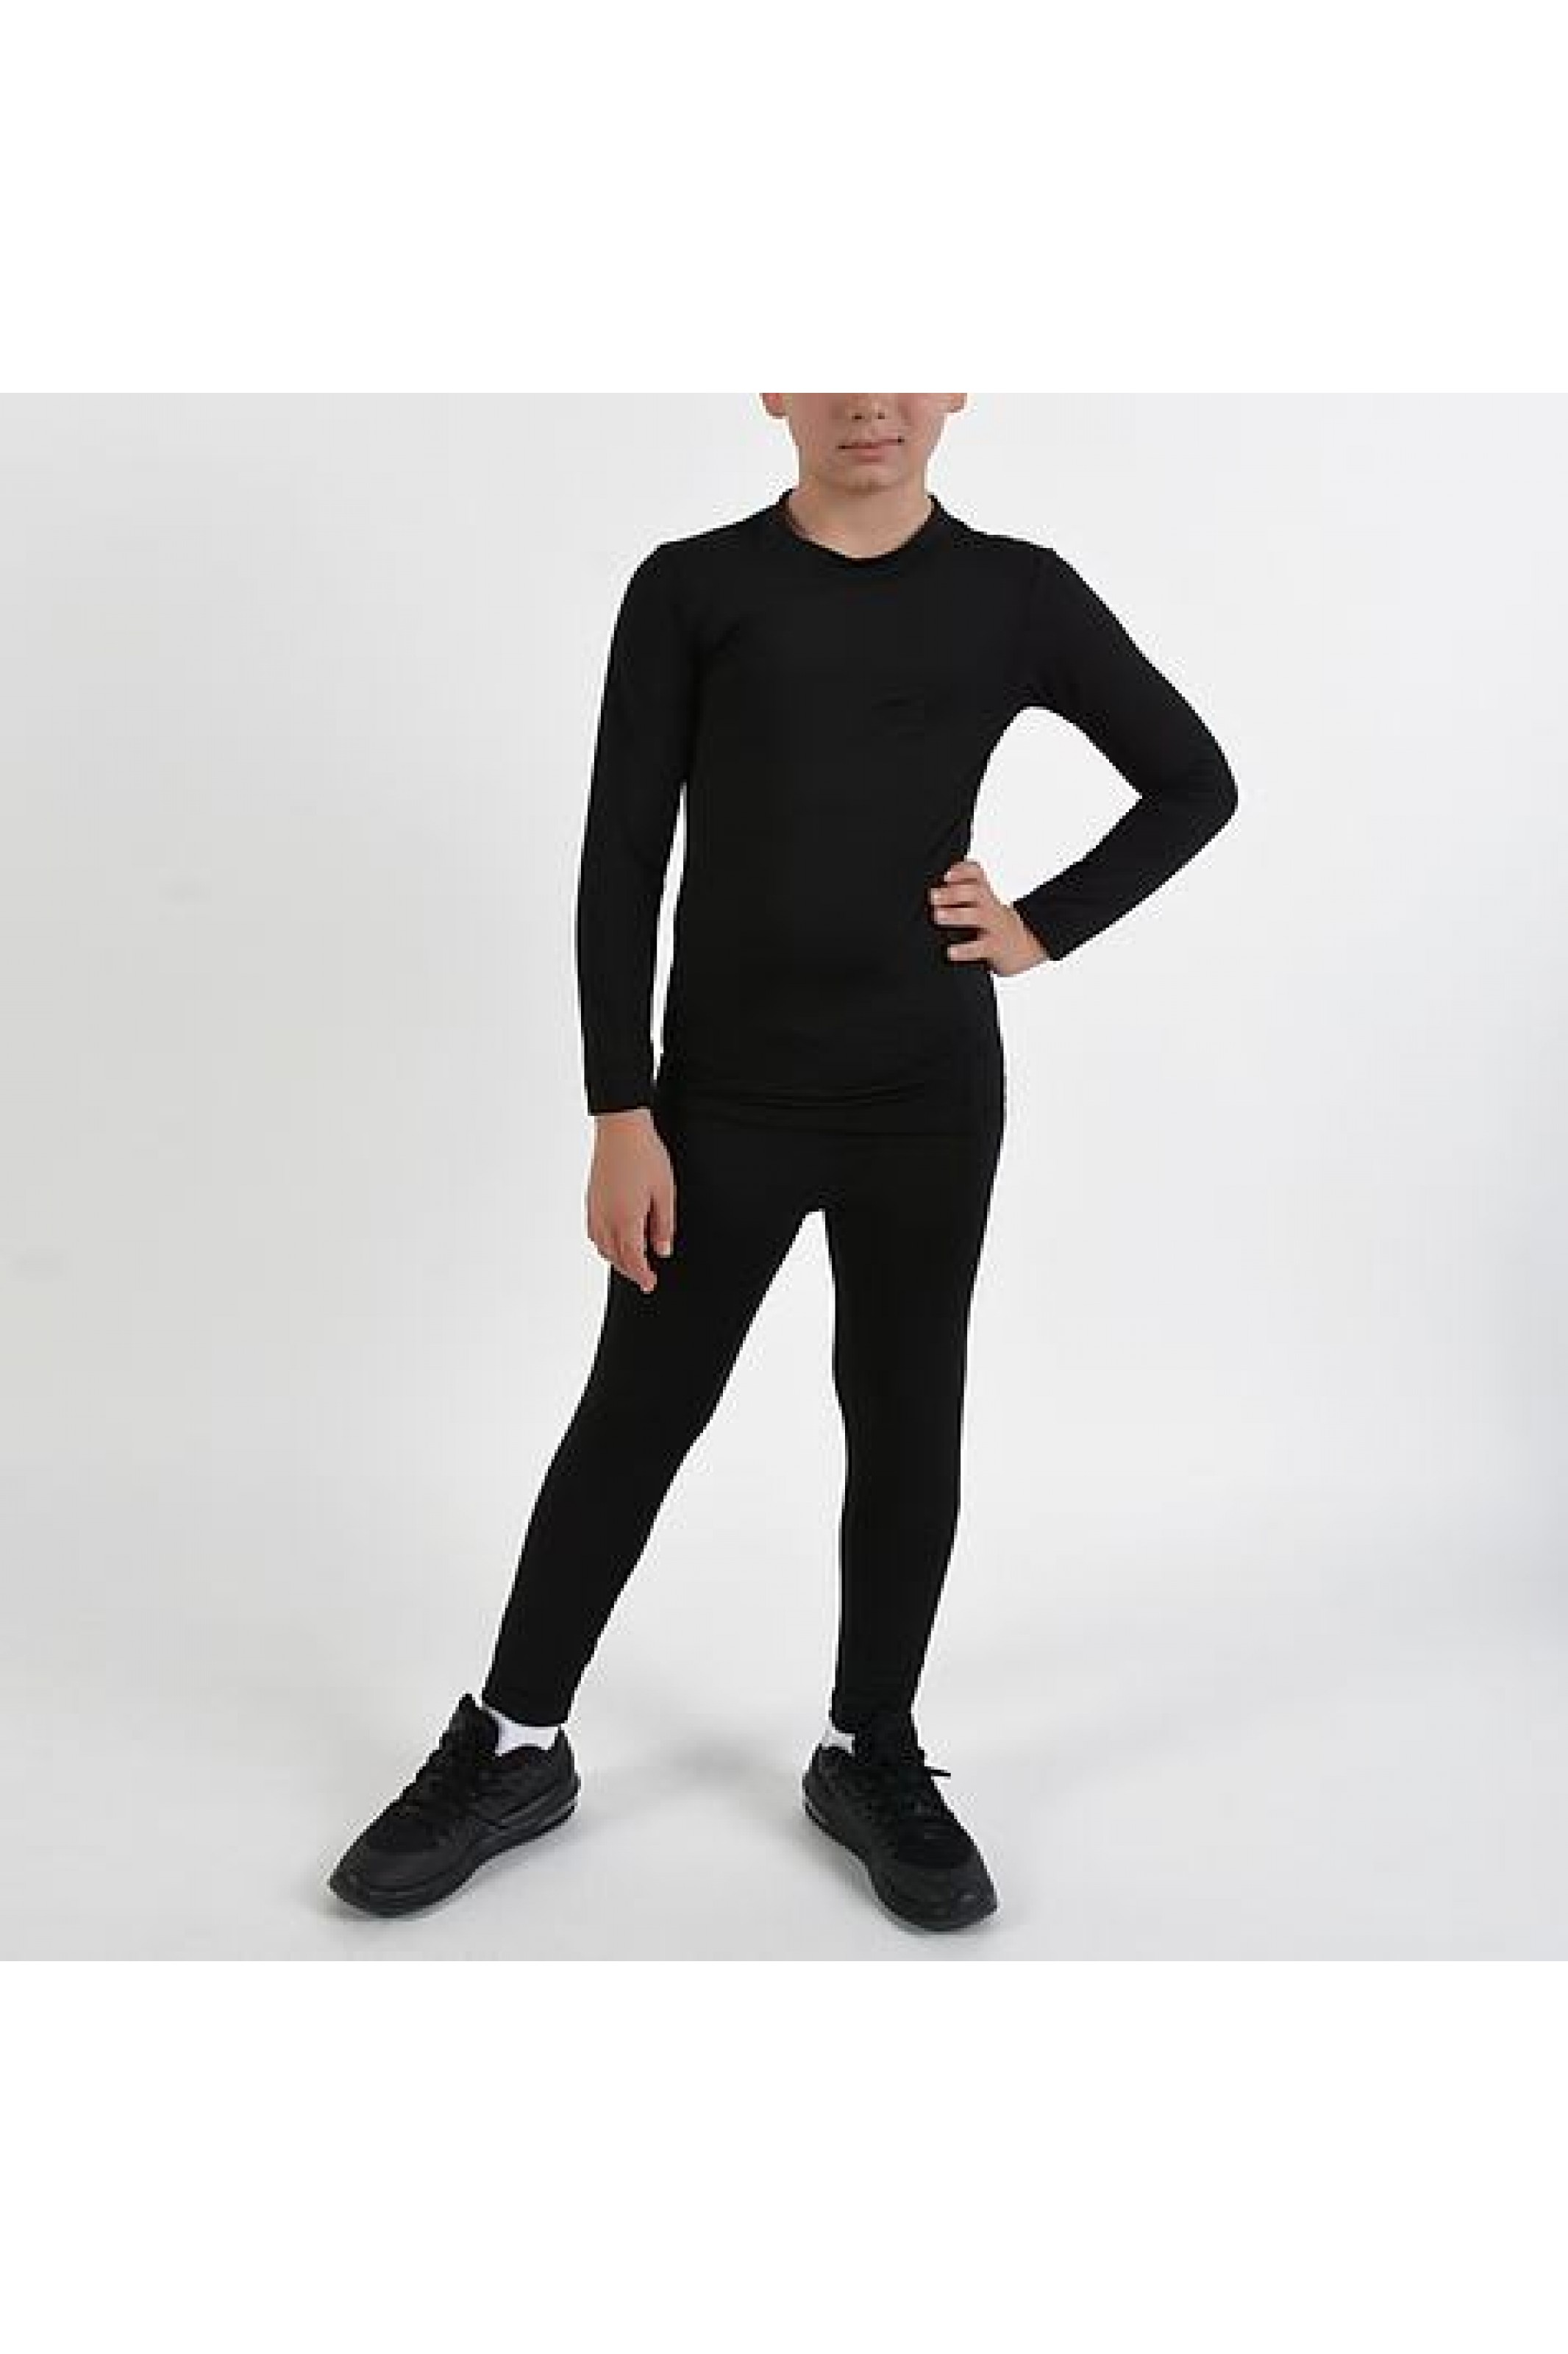 Cozy Pleated Skirt Thermal Pants Women For Toddler Girls Warm And Thick  Spring/Autumn Leggings For School And Outdoor Activities Style #230821 From  Tuo07, $11.17